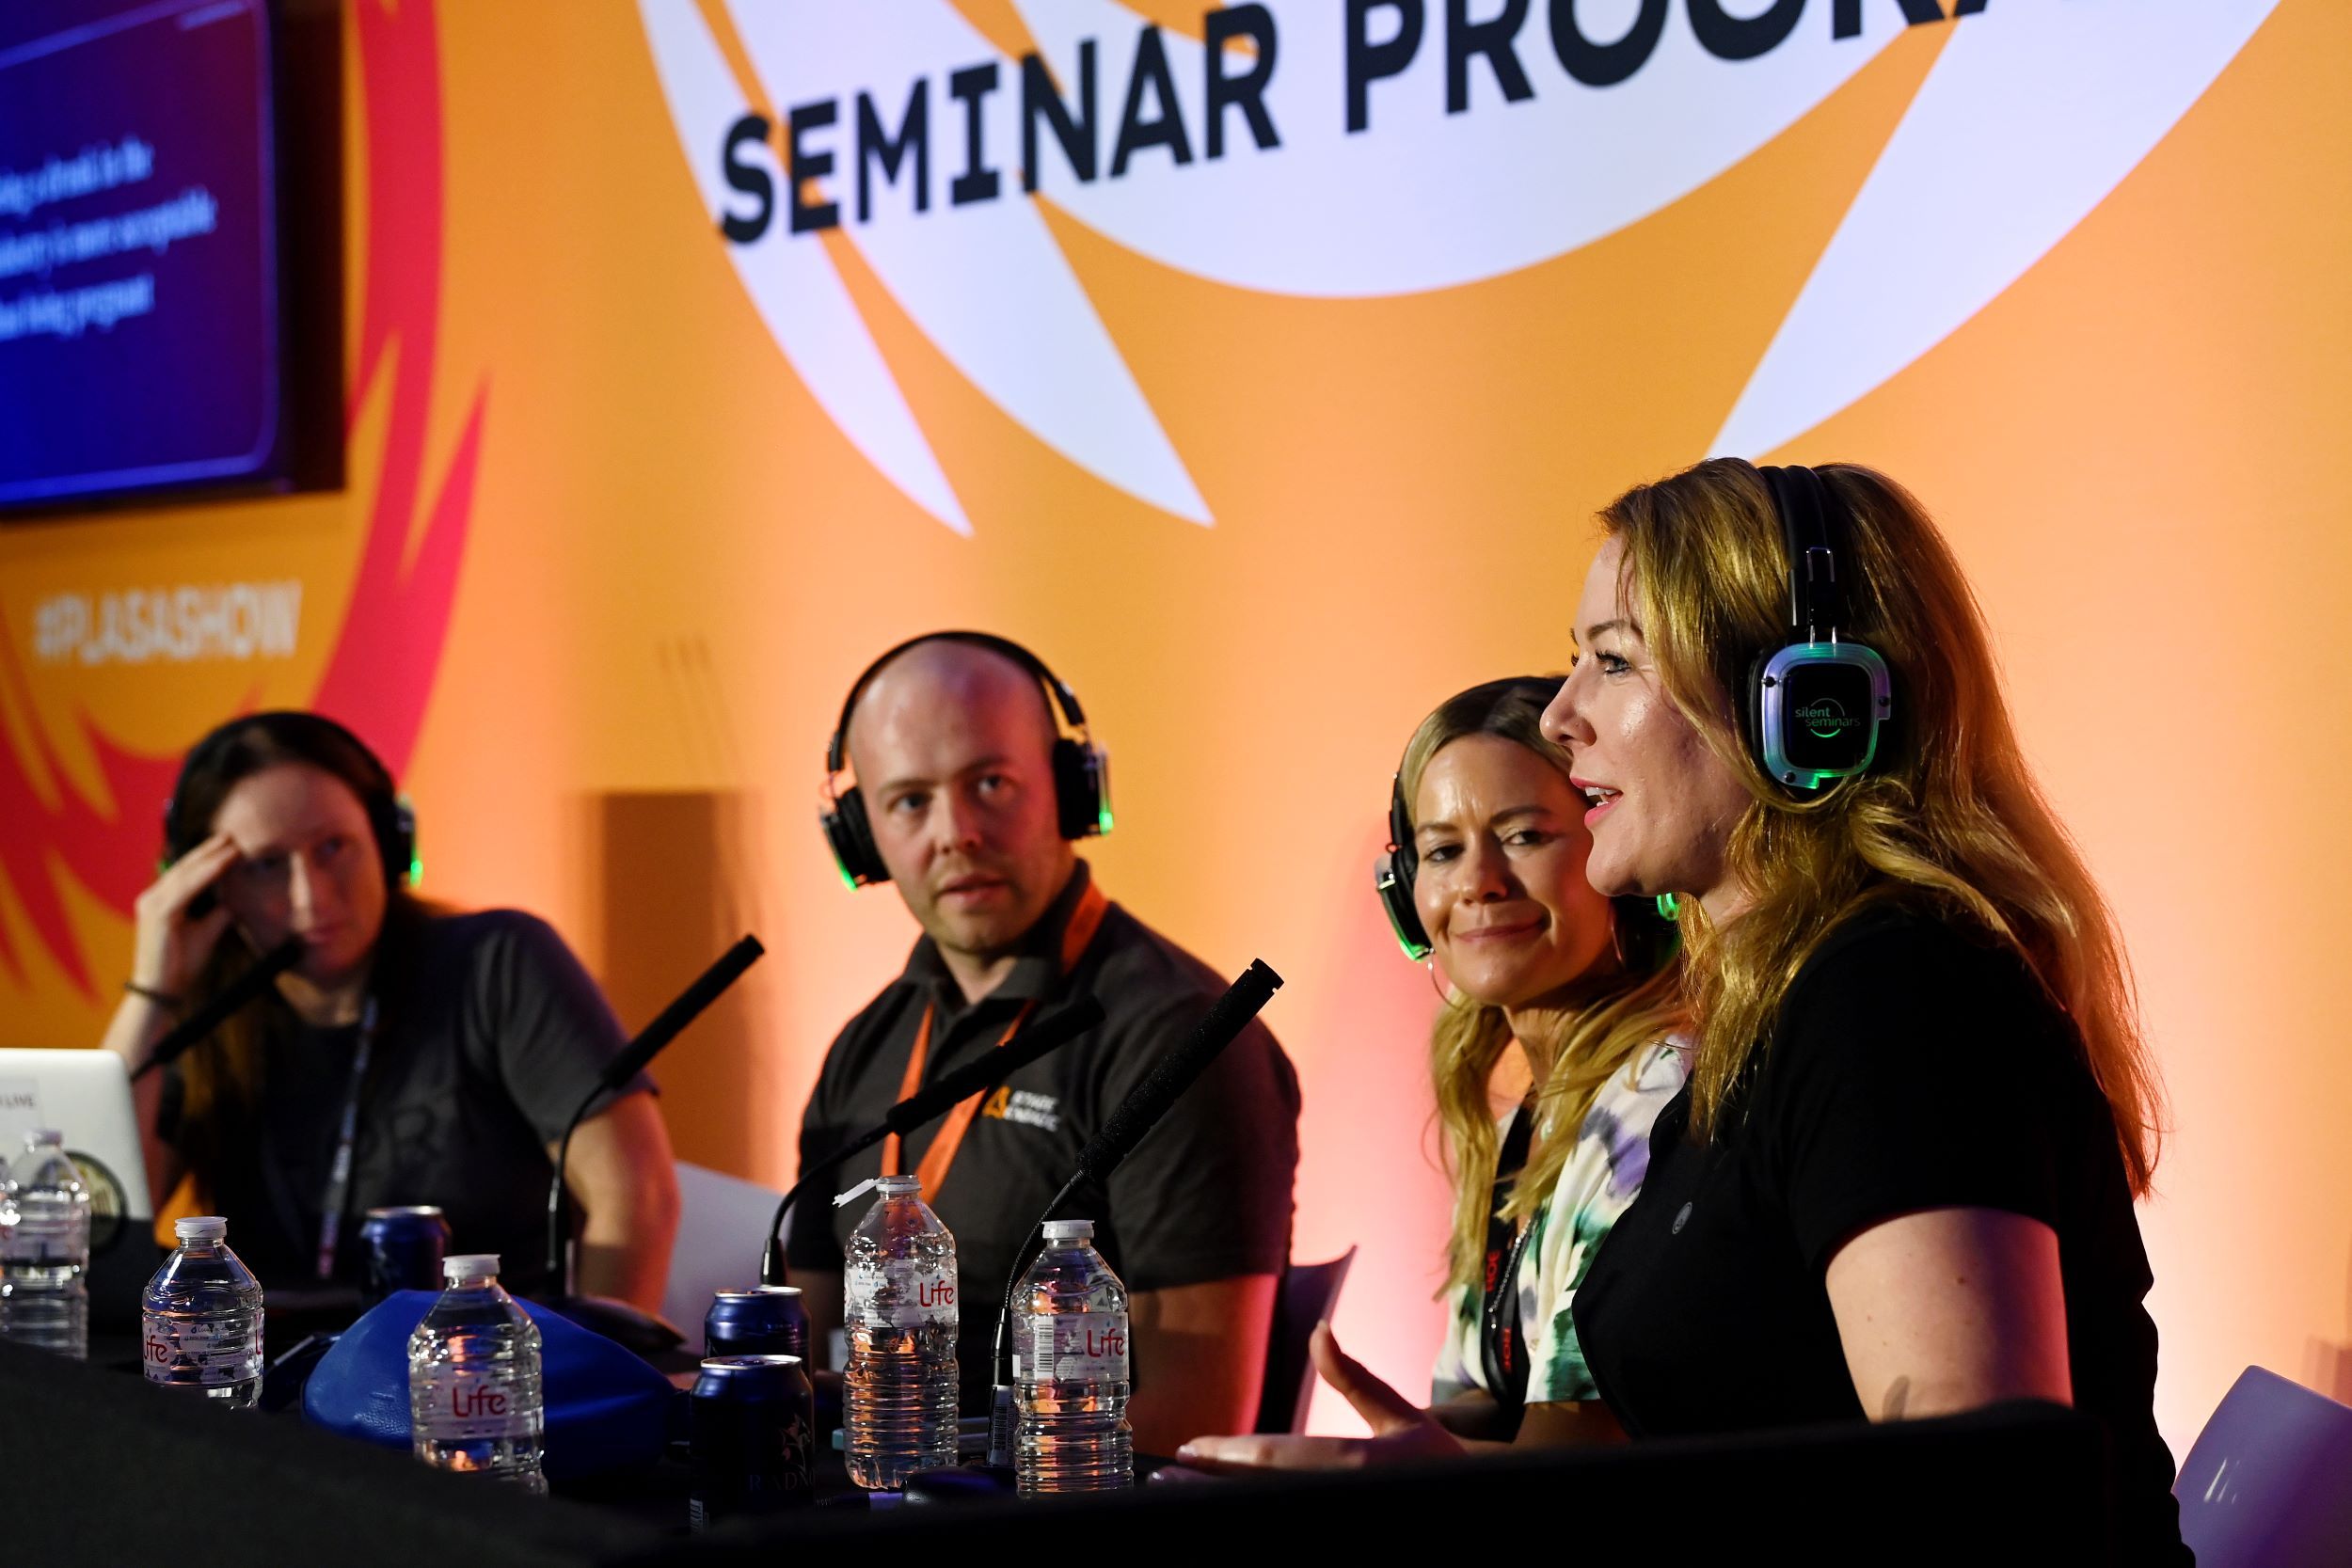 3 women and 1 man speaking on panel session at plasa show